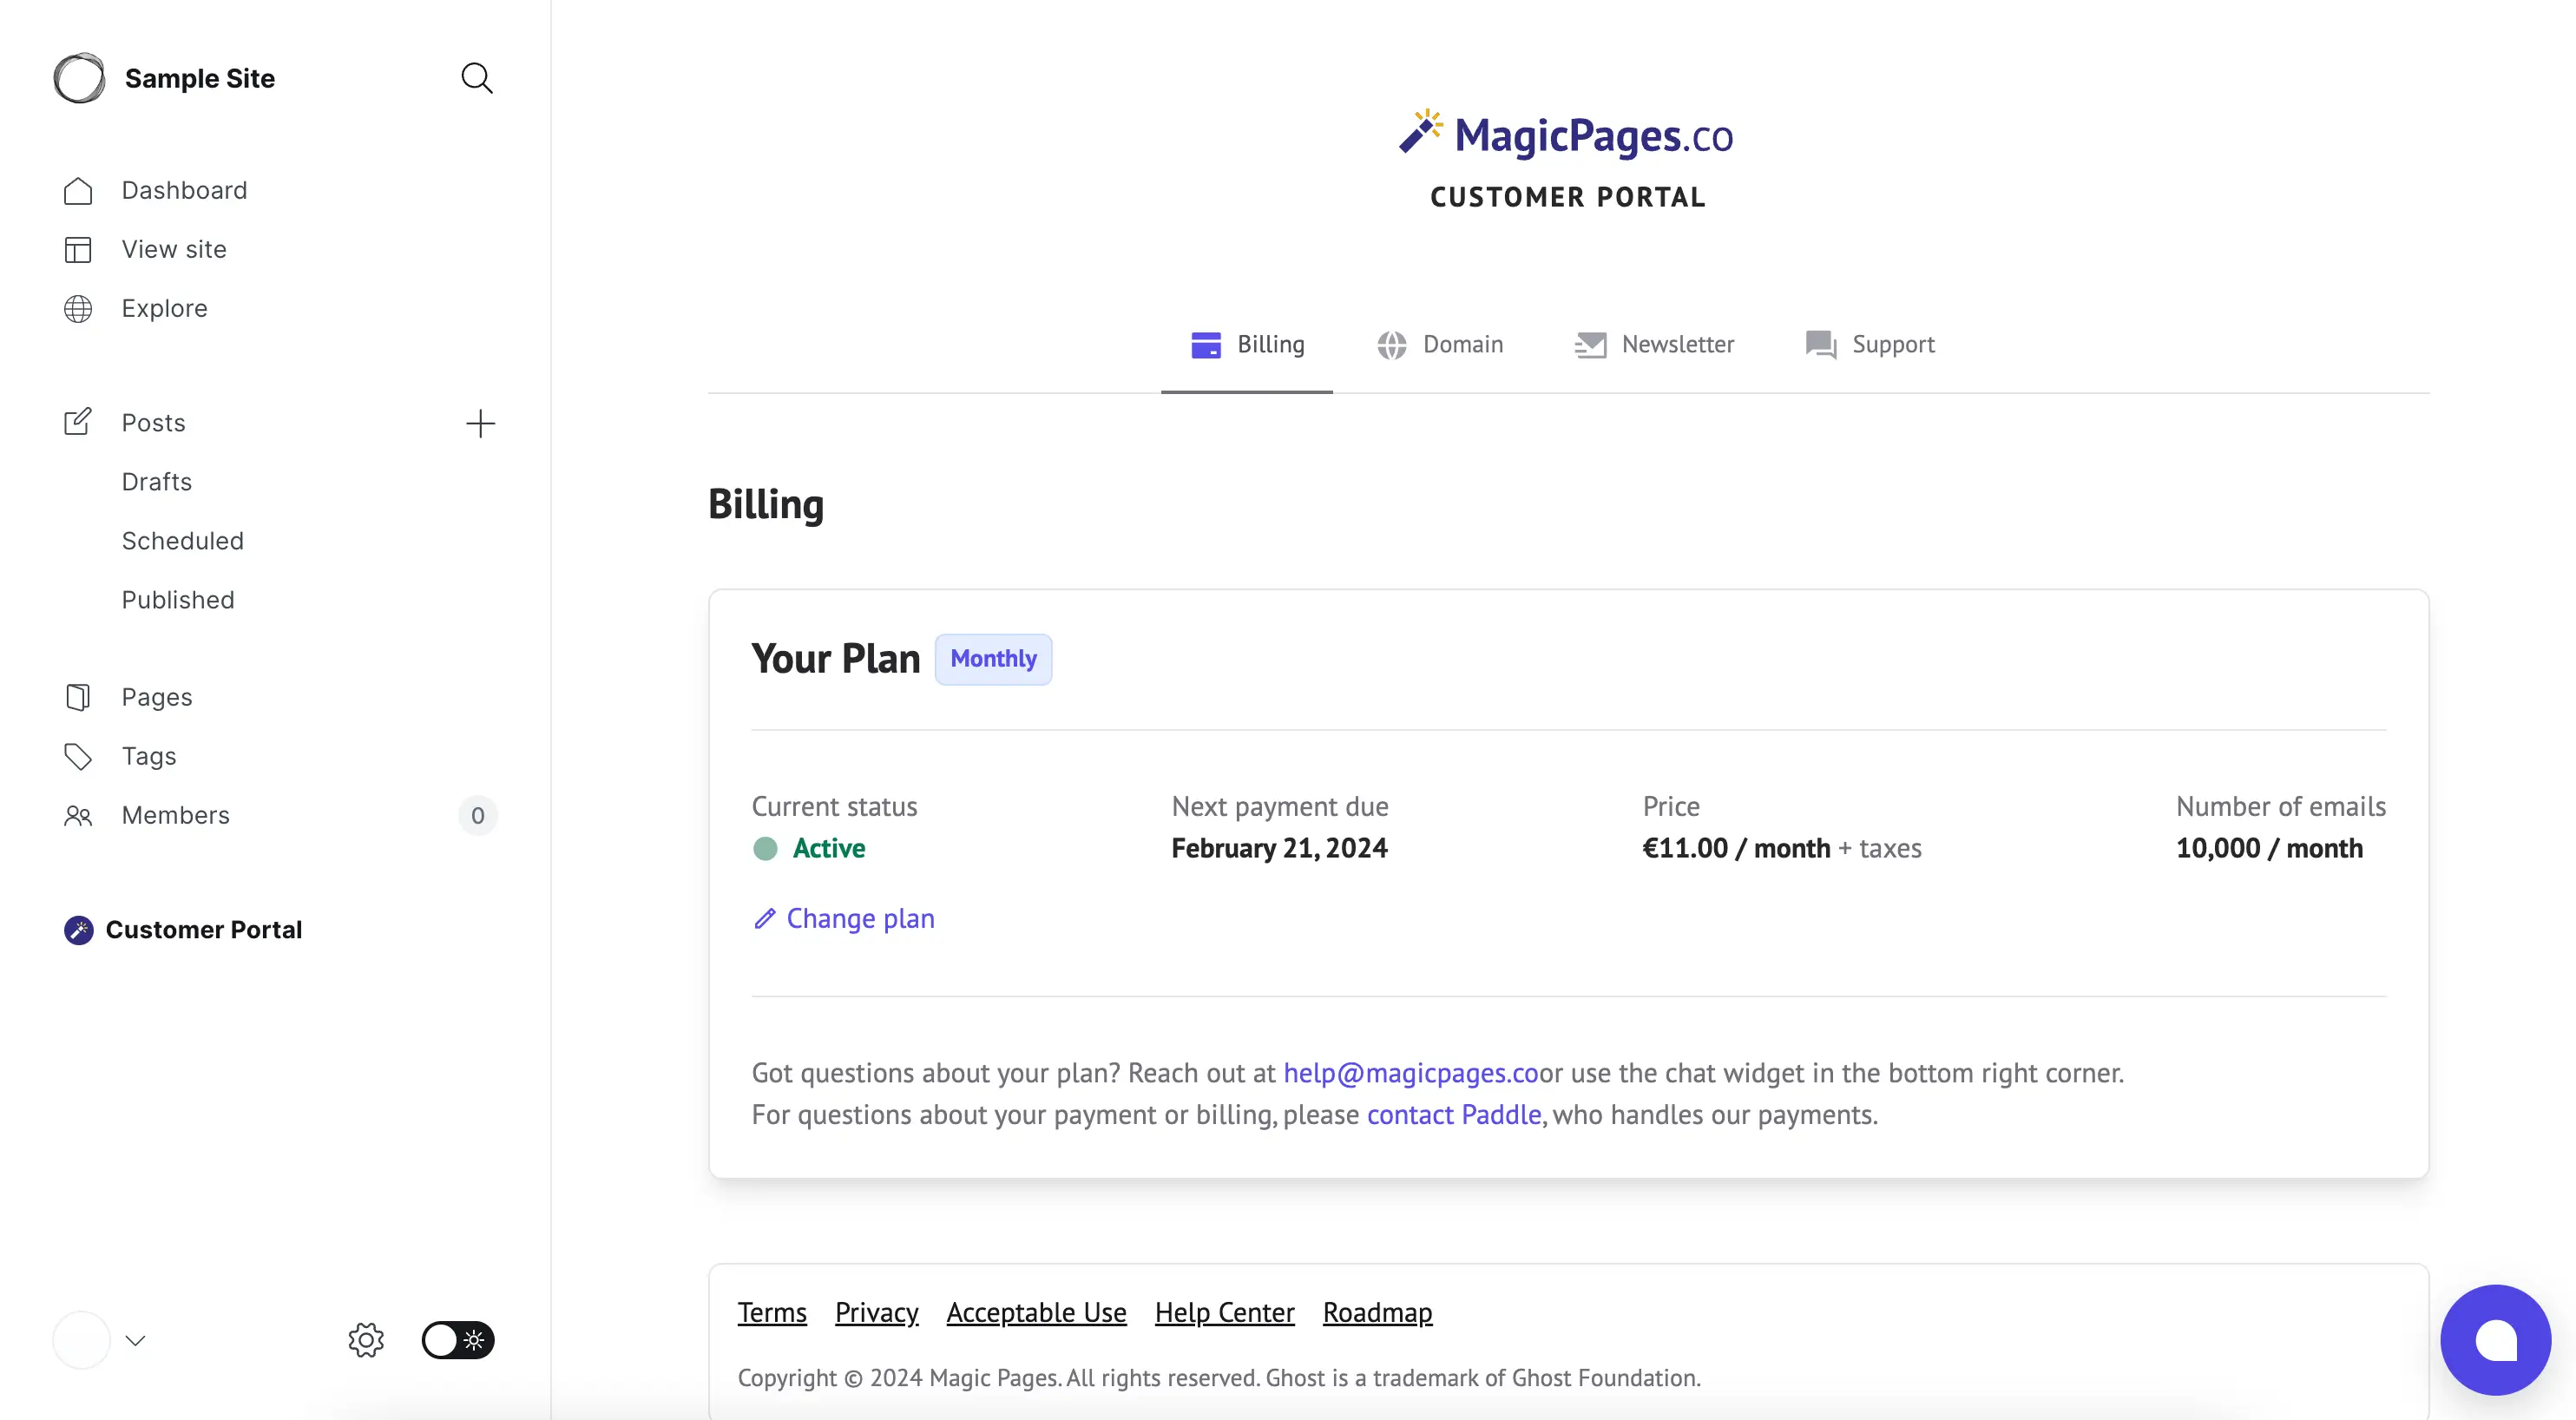 Screenshot of the integrated Magic Pages customer portal